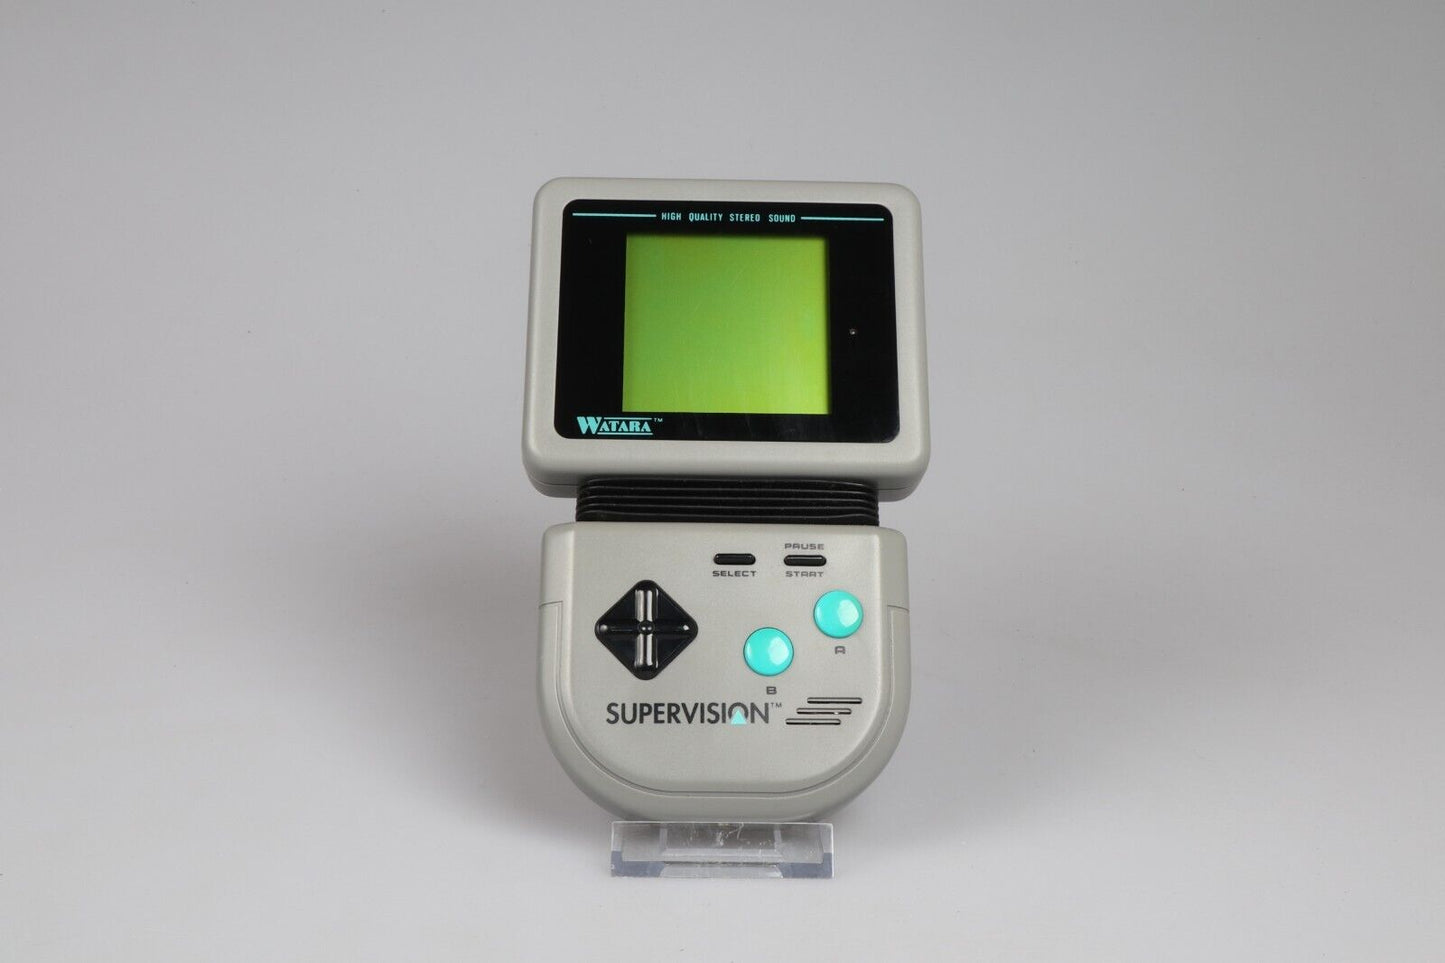 Supervision | Portable Video Game System #9205